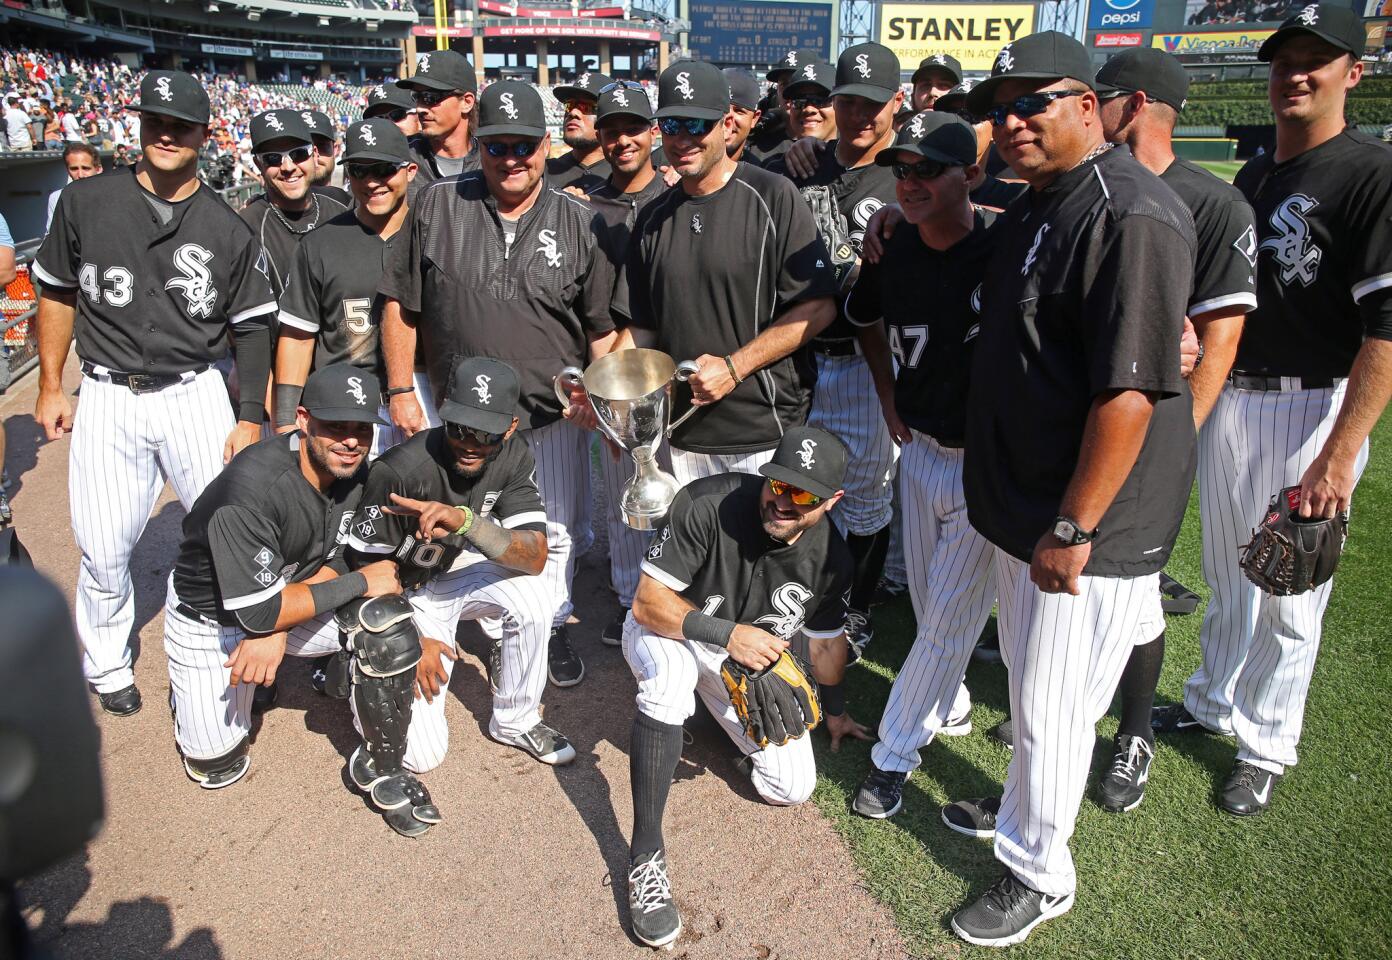 The White Sox hold the Crosstown Cup after their victory.